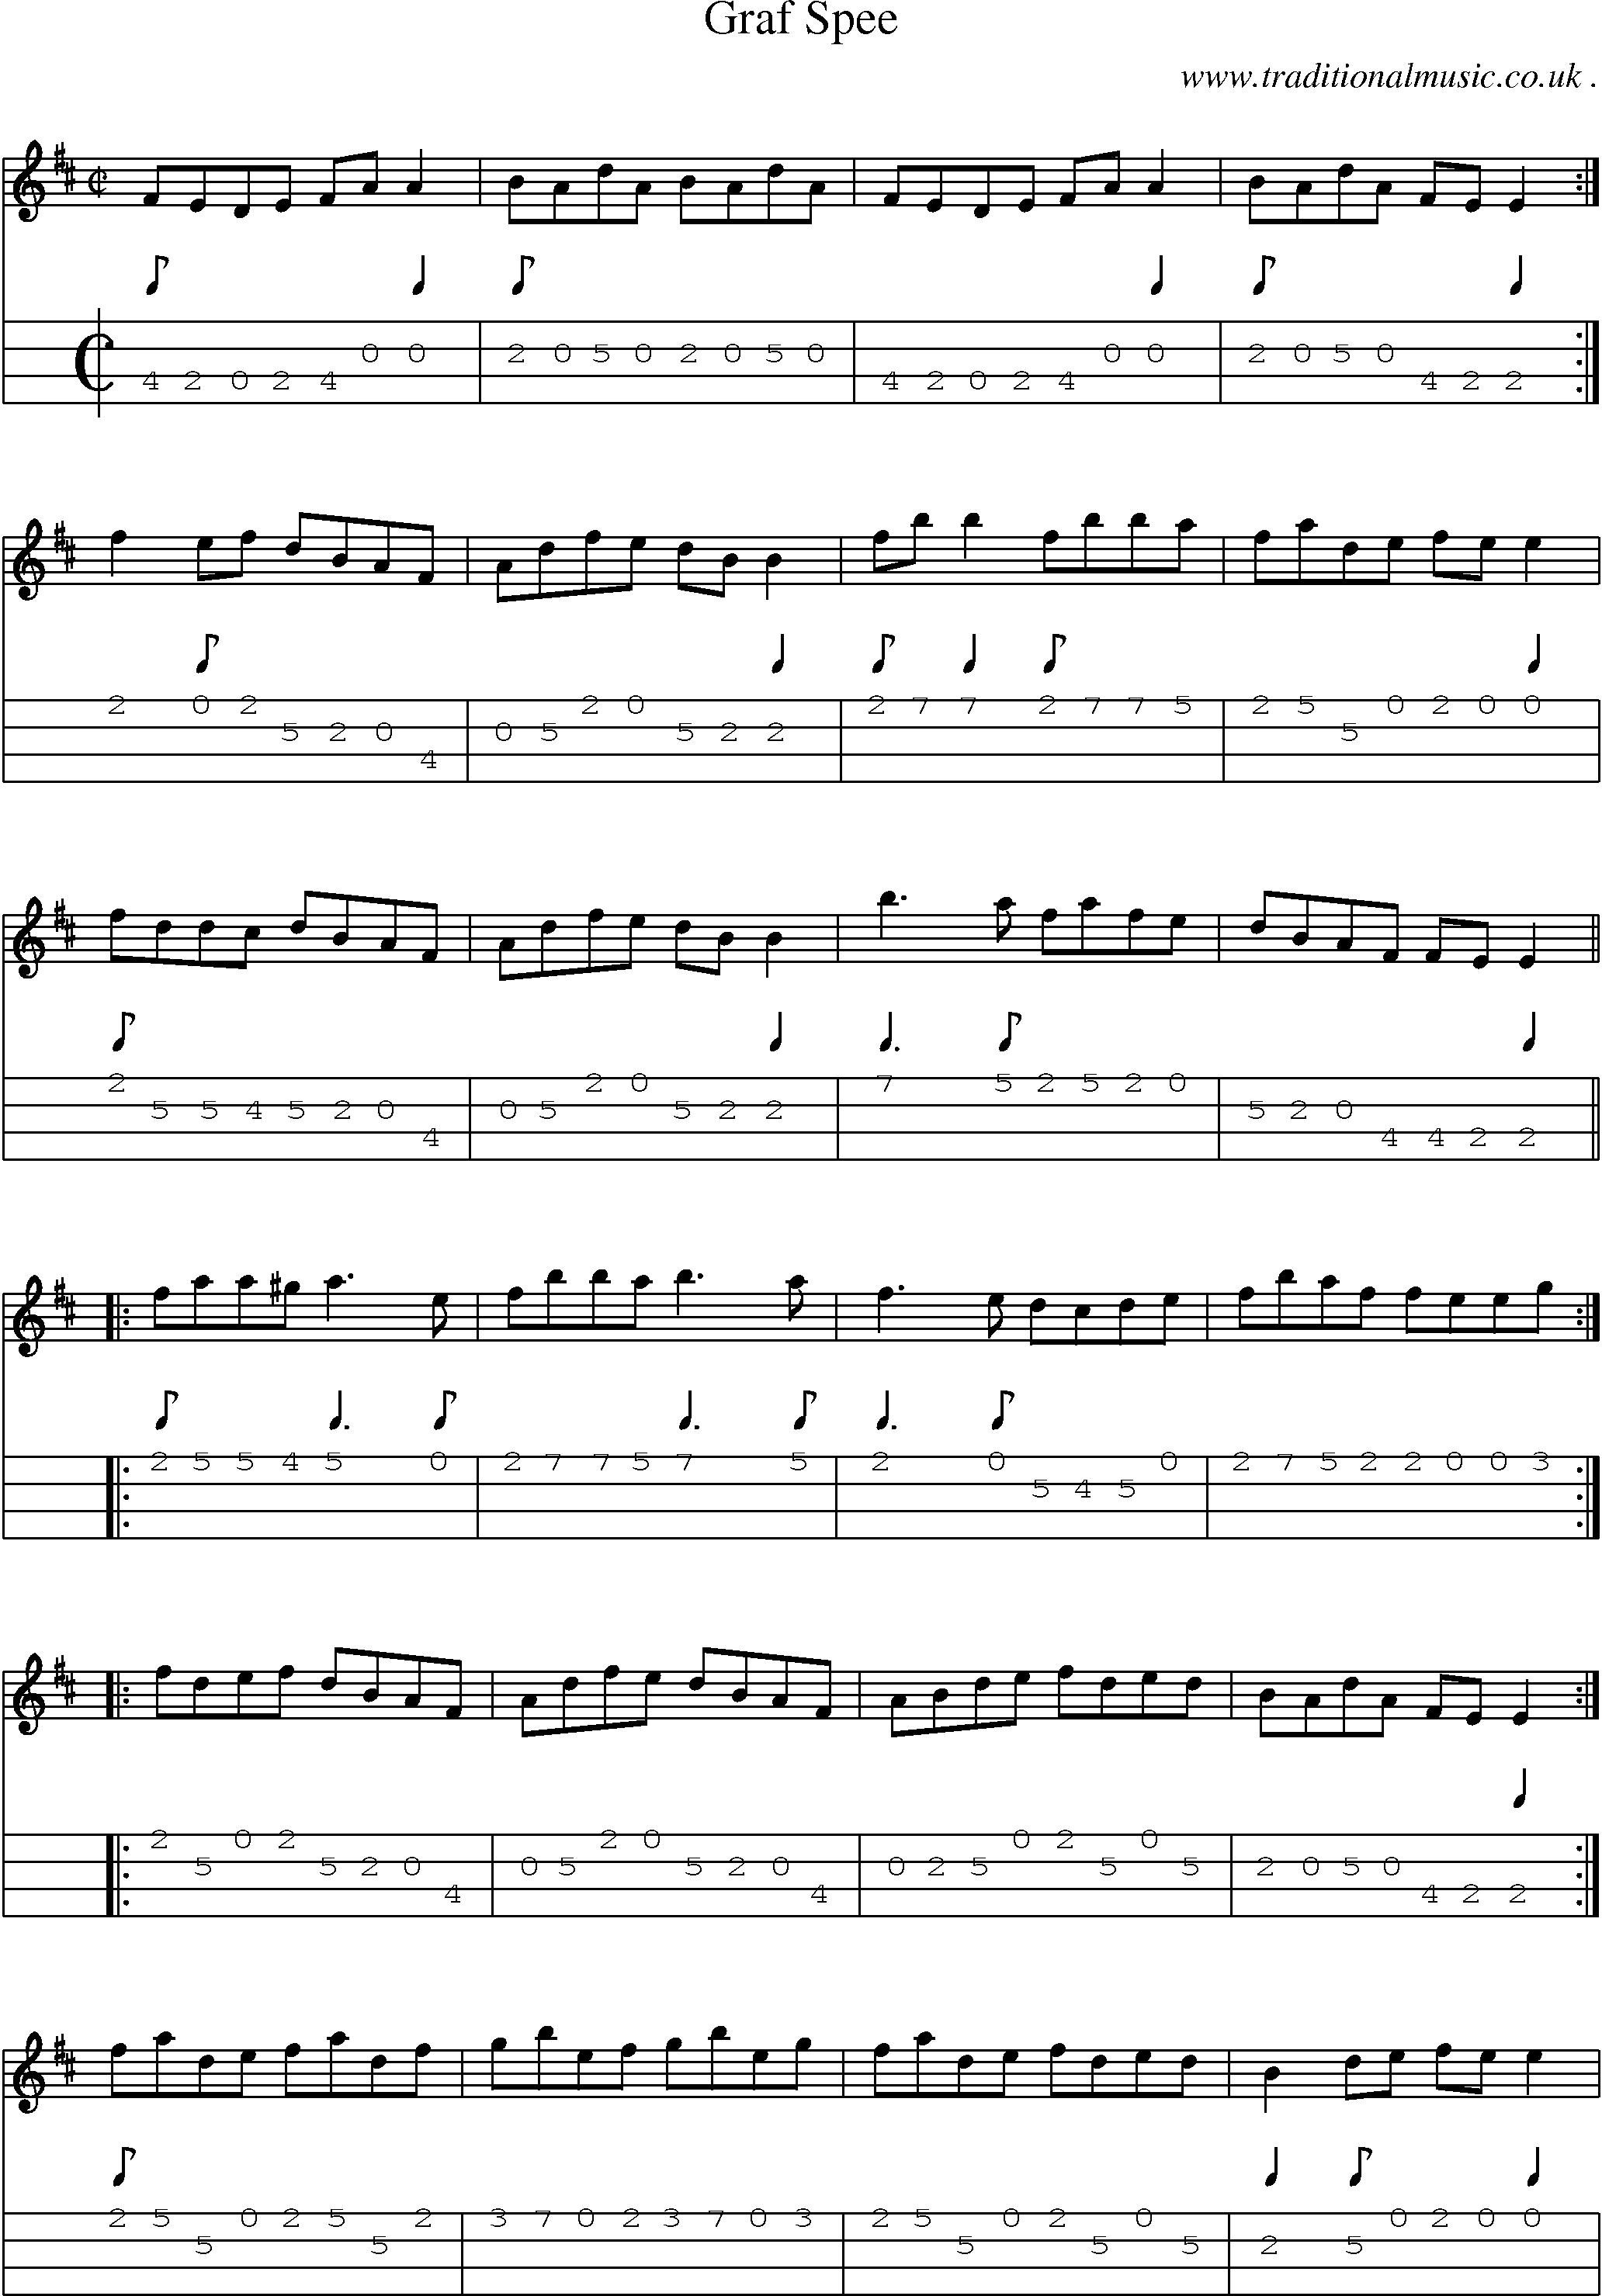 Sheet-Music and Mandolin Tabs for Graf Spee